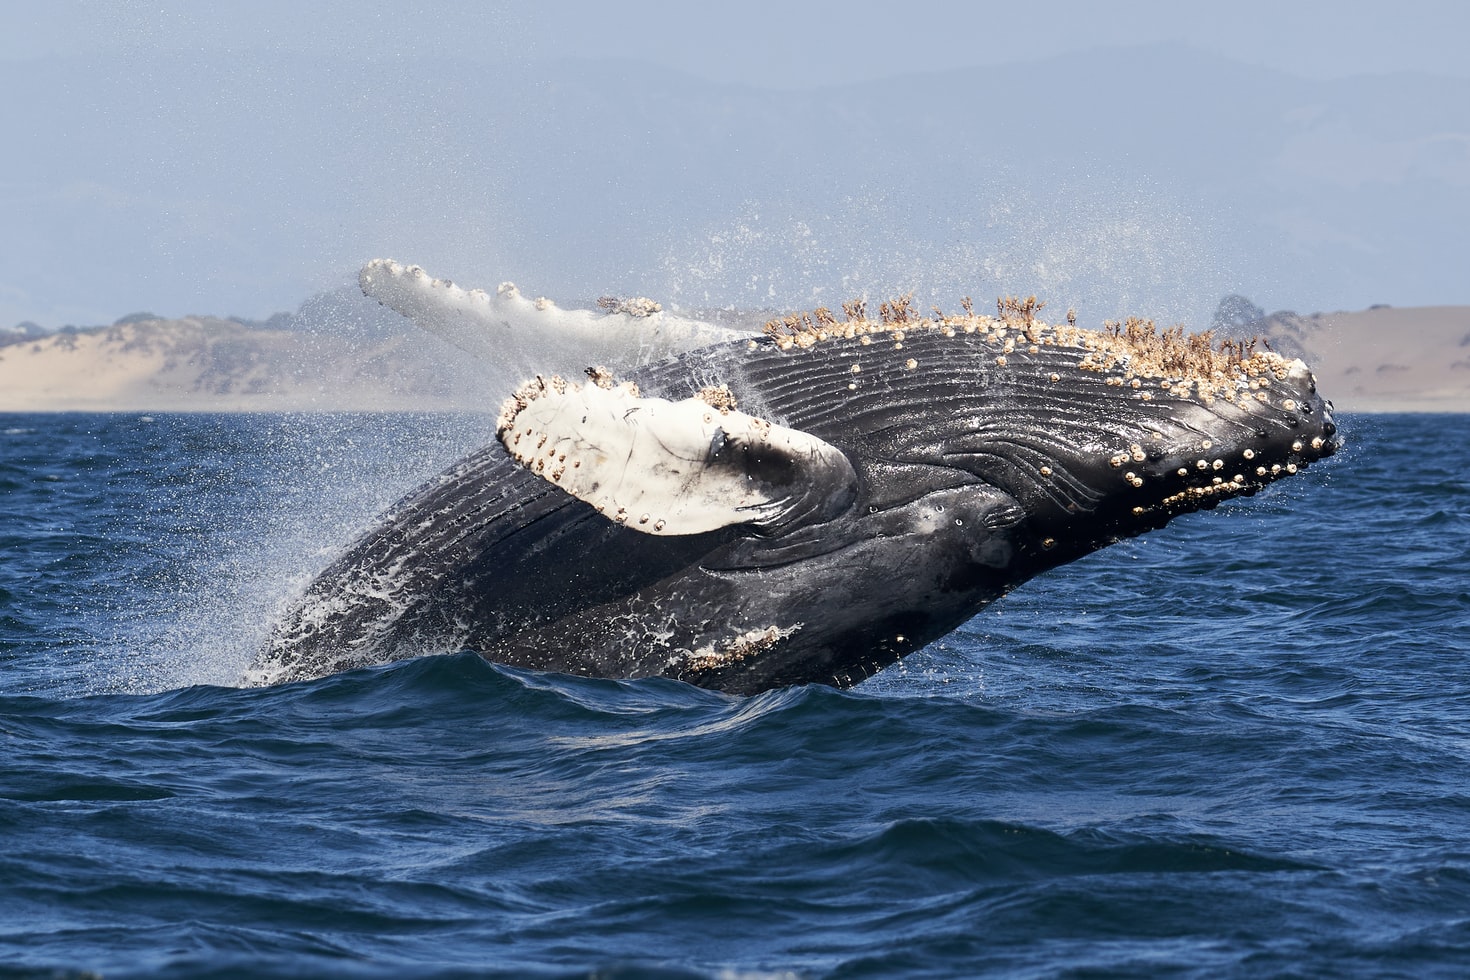 10 Things To Bring With You on Your Winter Whale Watching Trip